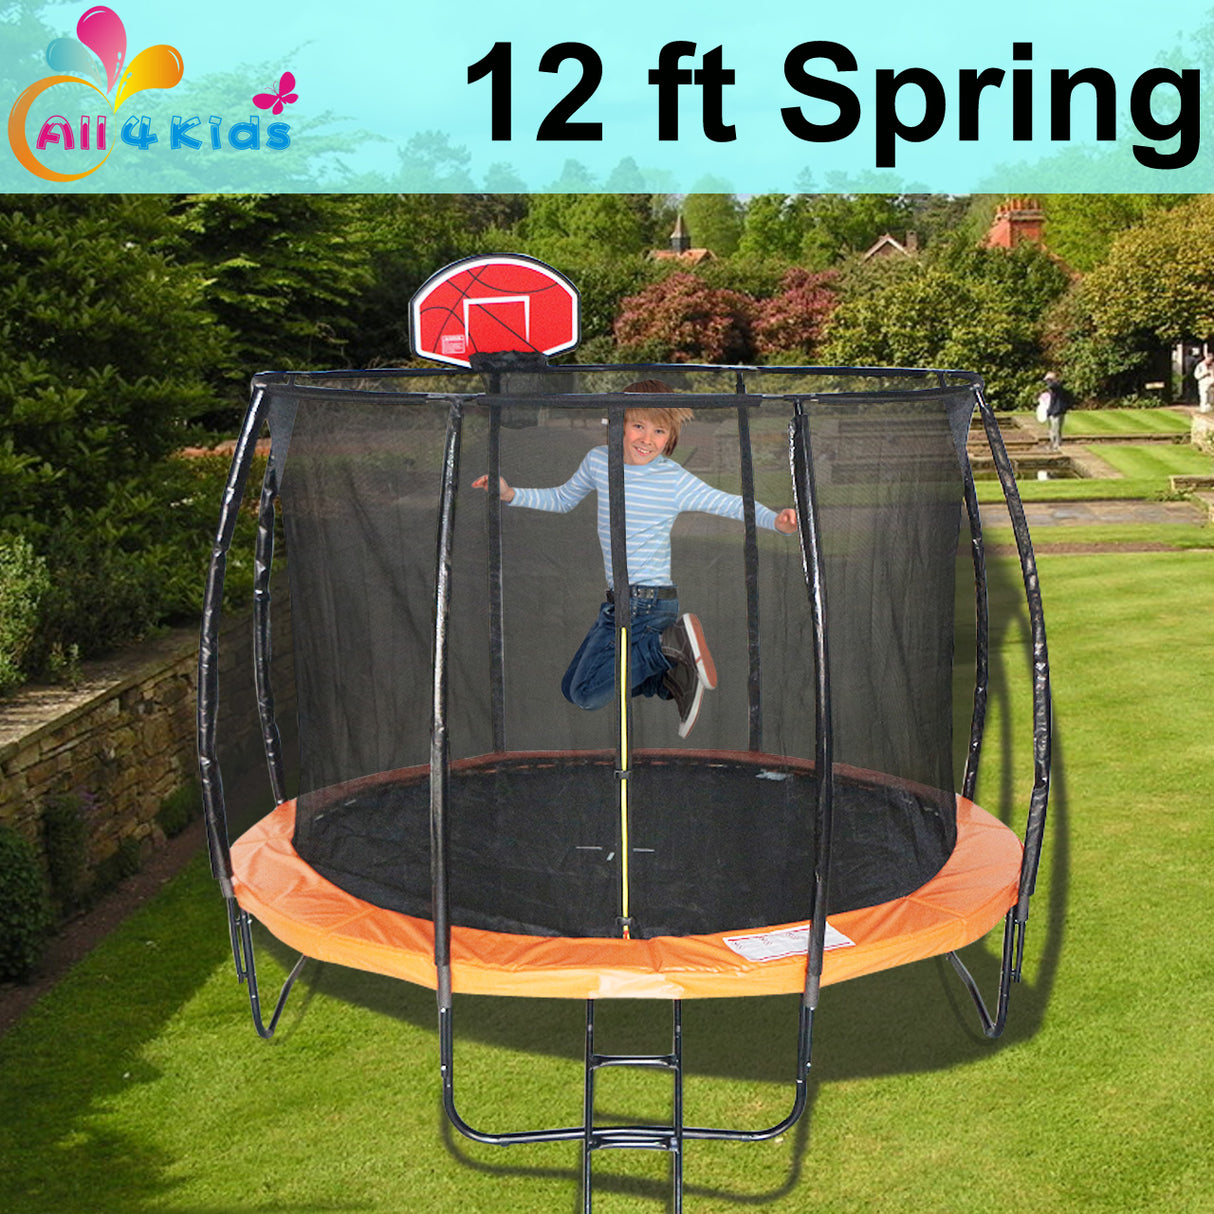 ALL 4 KIDS 12 FT Jump Zone Spring Trampoline with Basketball Board